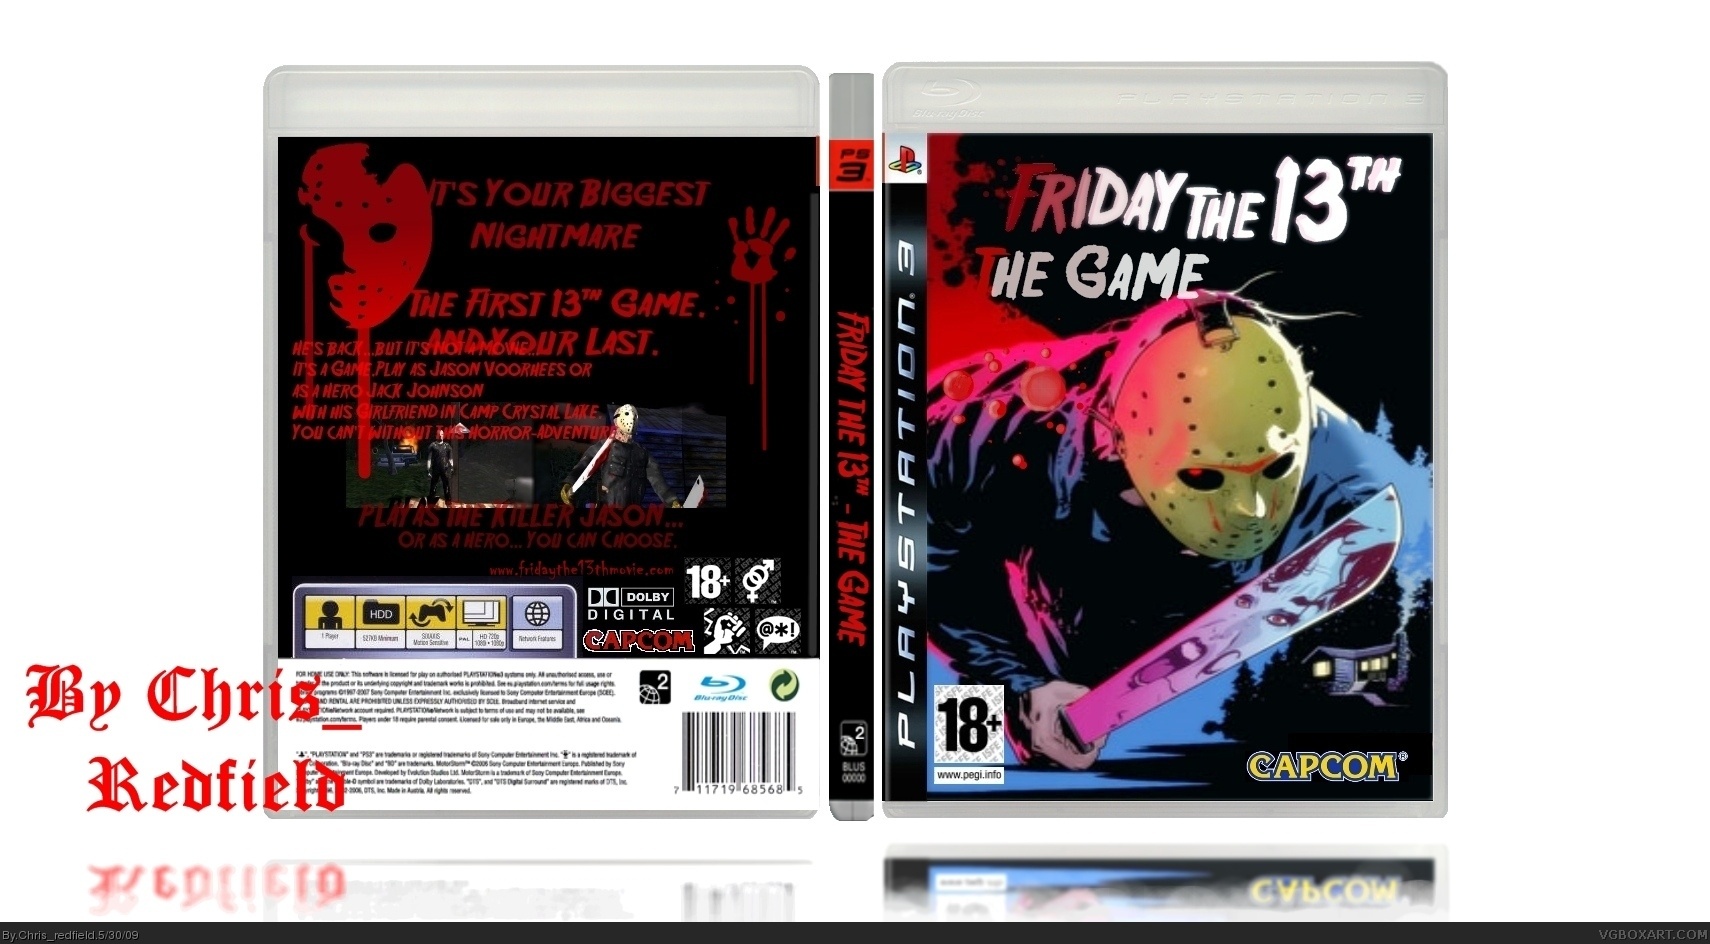 Friday the 13th - The Game box cover